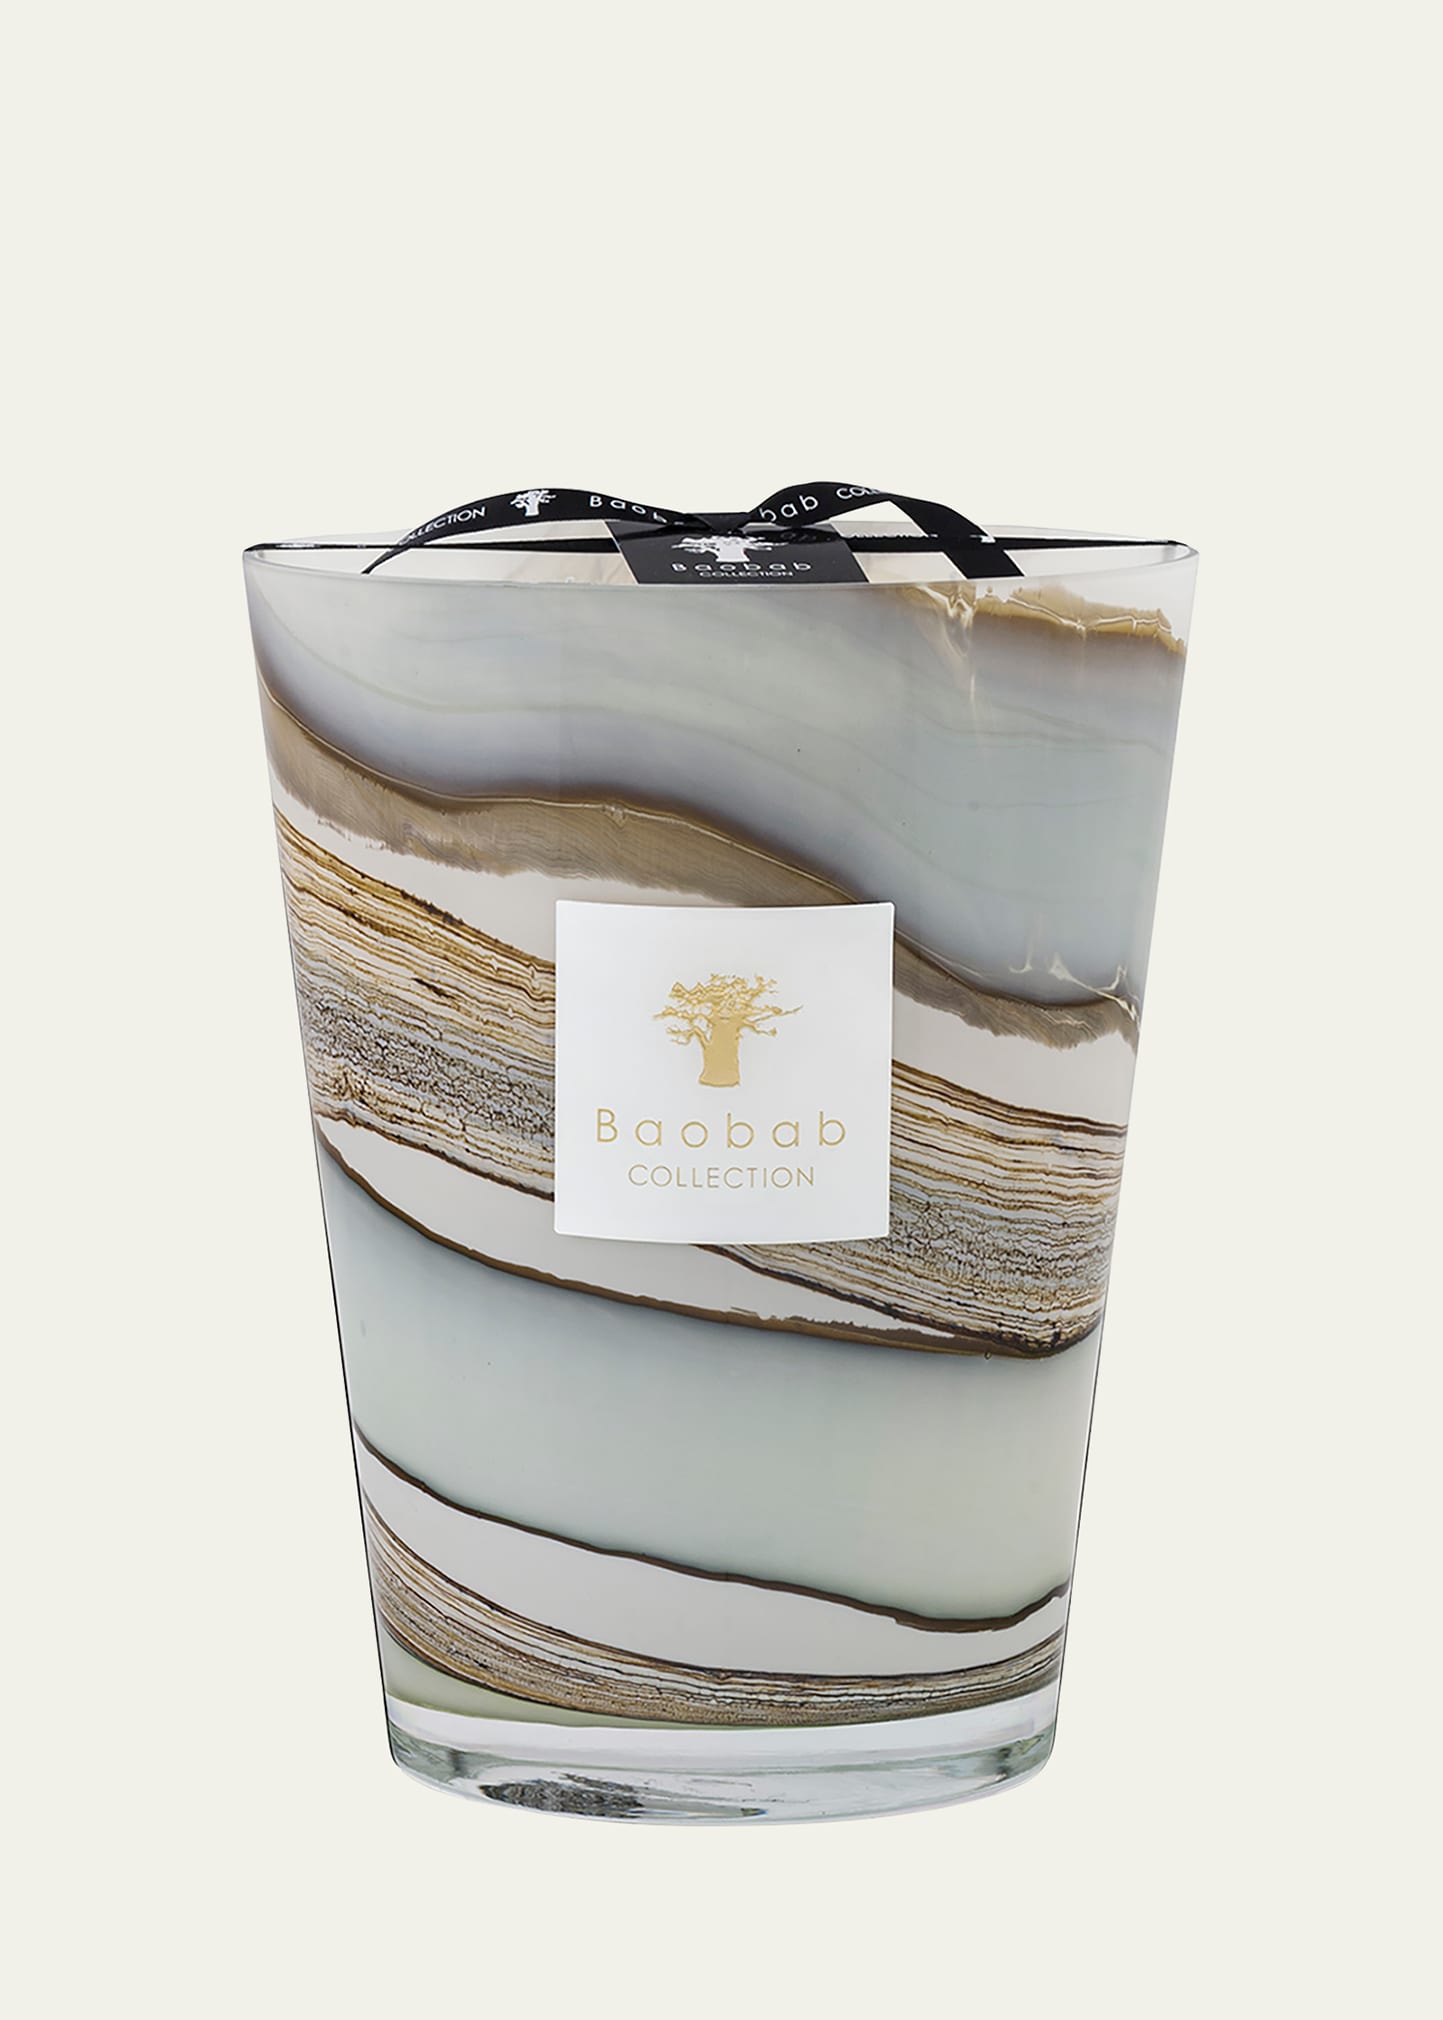 Baobab Collection Sand Sonora Max24 5-Wick Candle, 176 oz.